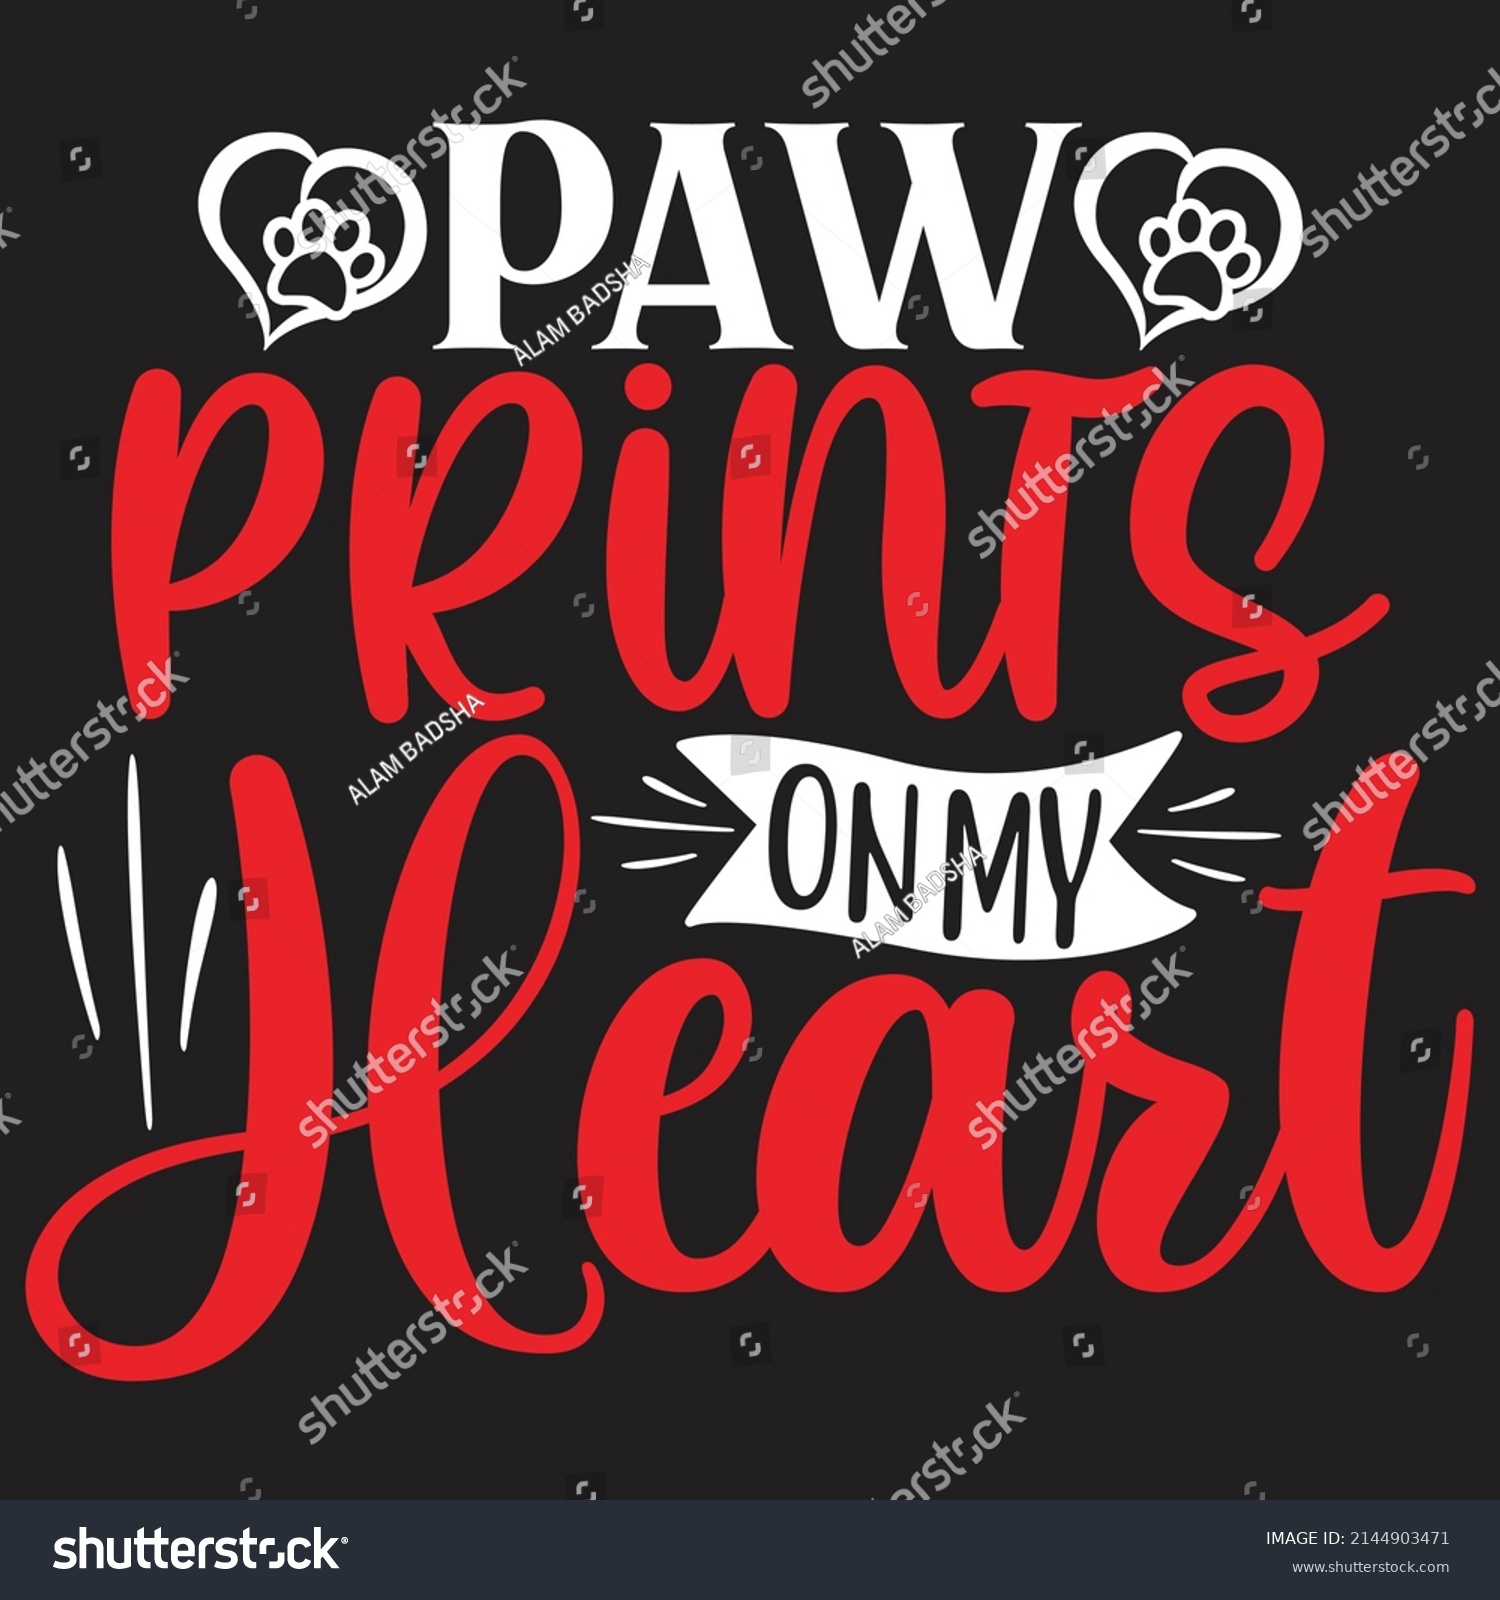 SVG of Paw Prints on My Heart - Dog T-shirt And  SVG Design, Vector File. svg